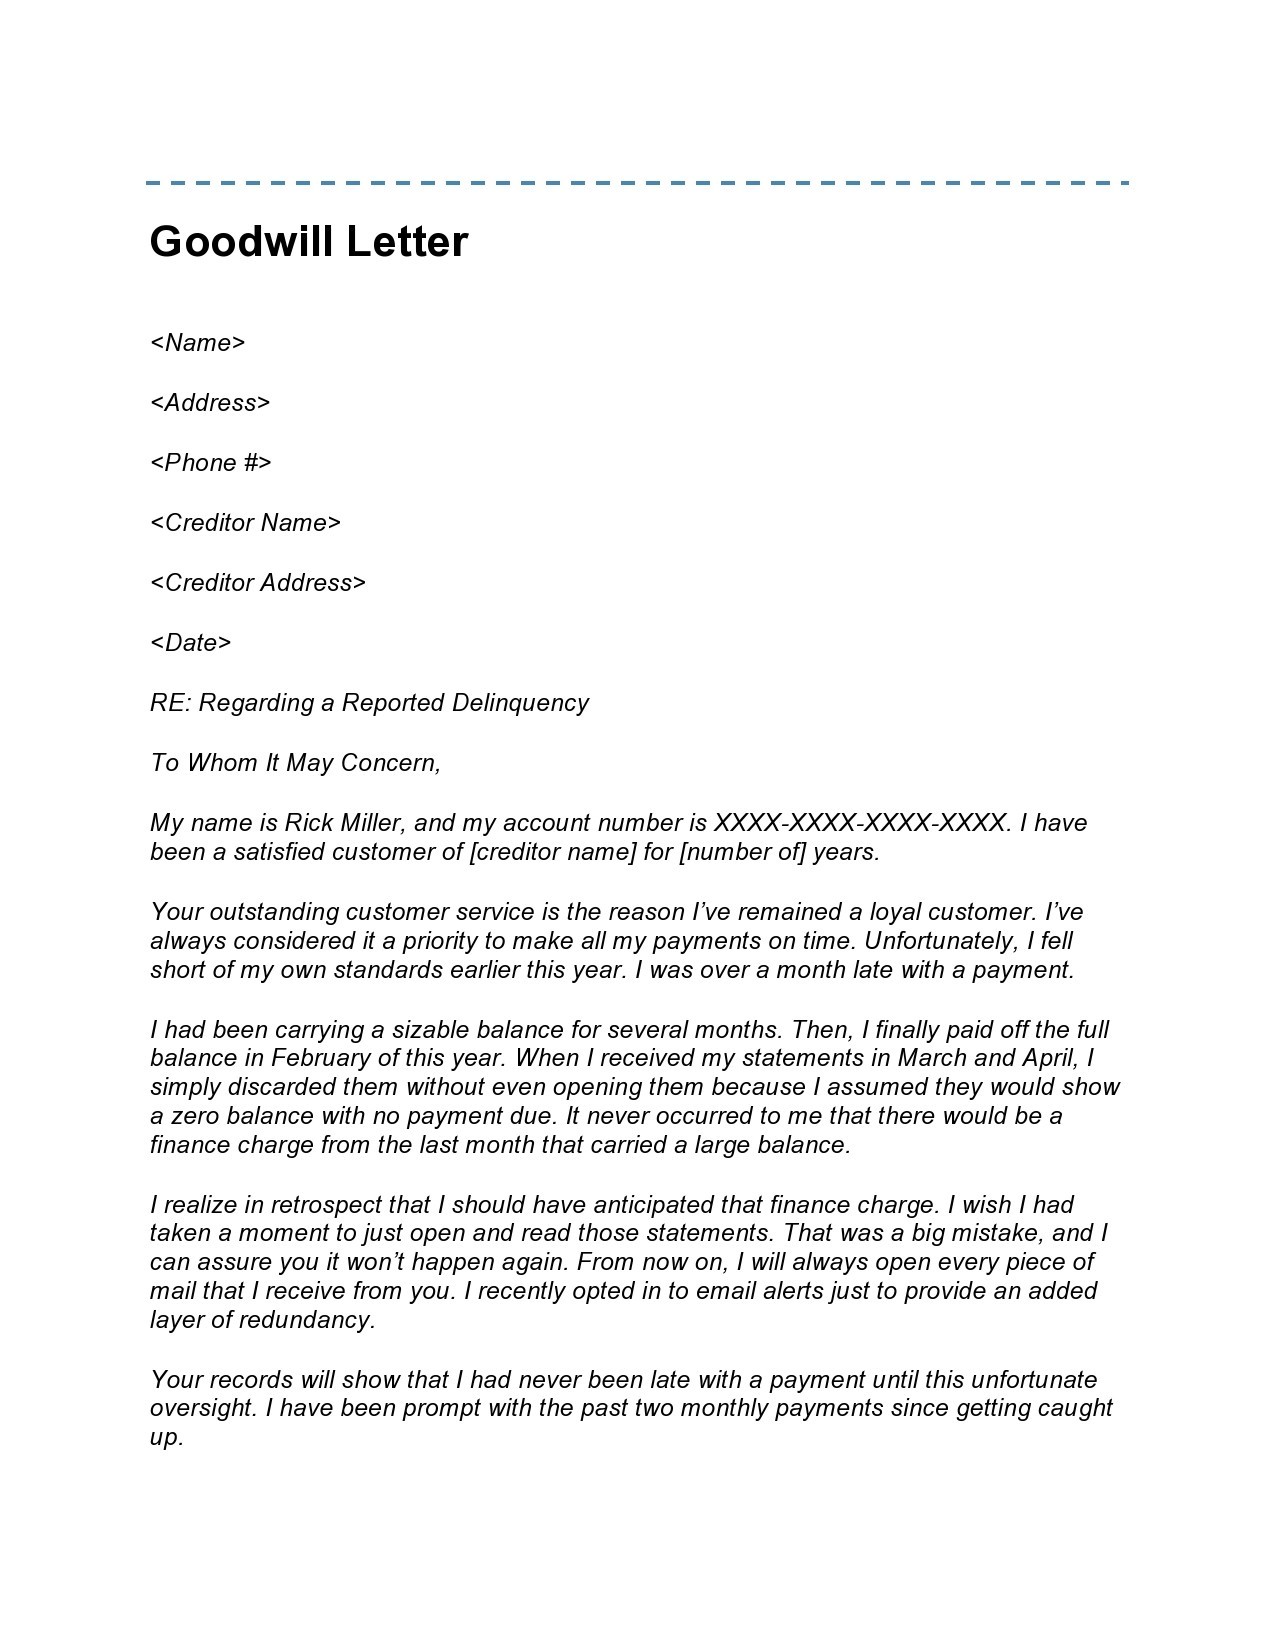 Free goodwill letter template 09